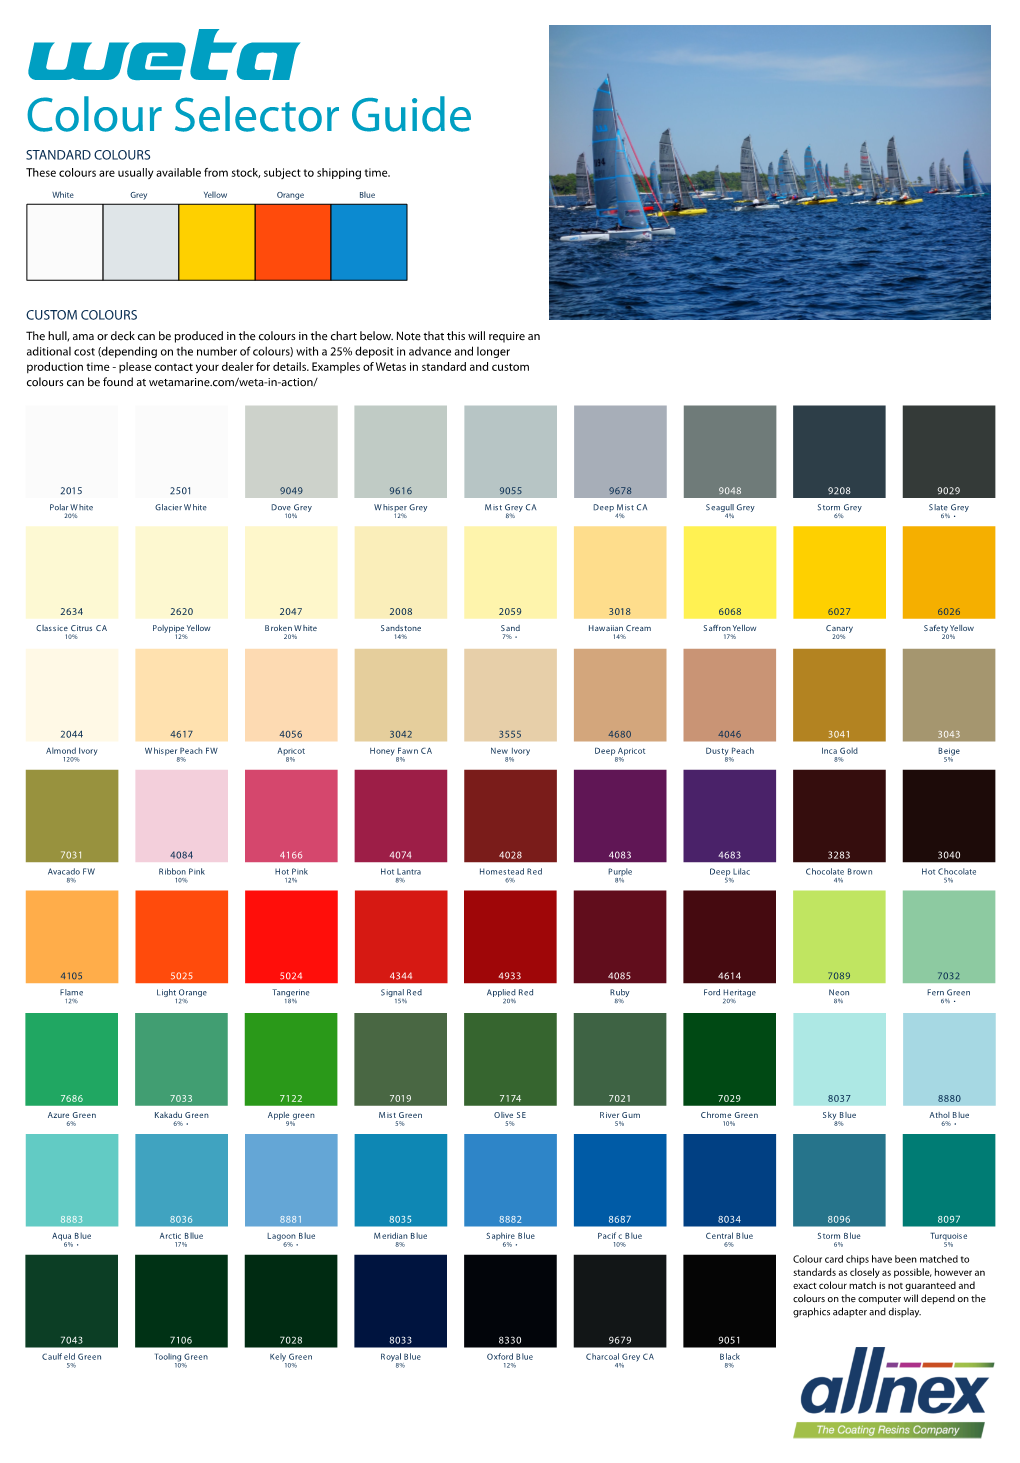 Colour Selector Guide STANDARD COLOURS These Colours Are Usually Available from Stock, Subject to Shipping Time